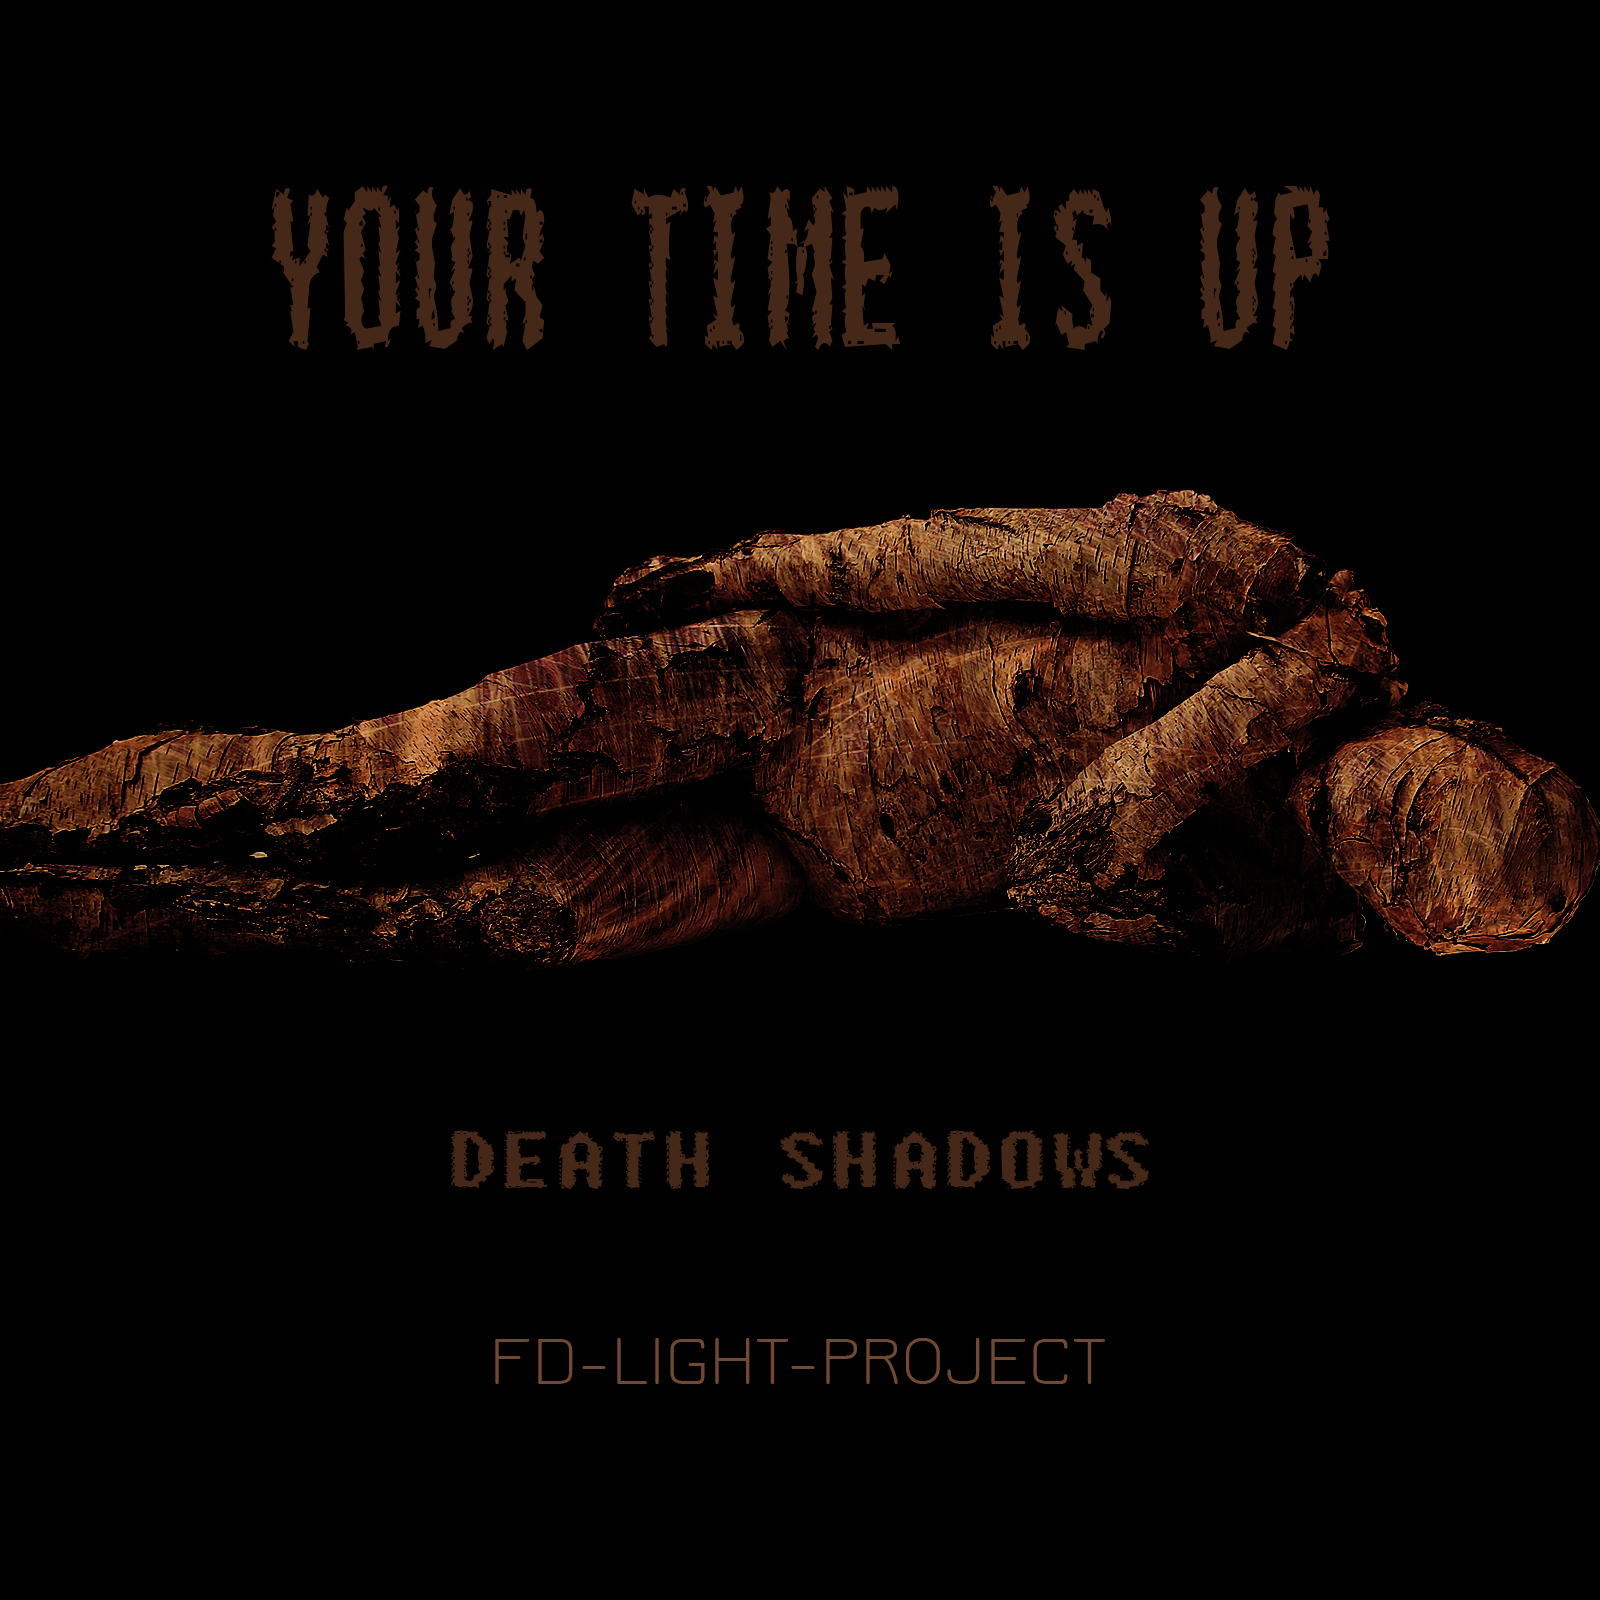 Your Time Is Up - Death Shadows by FD-Light-Project